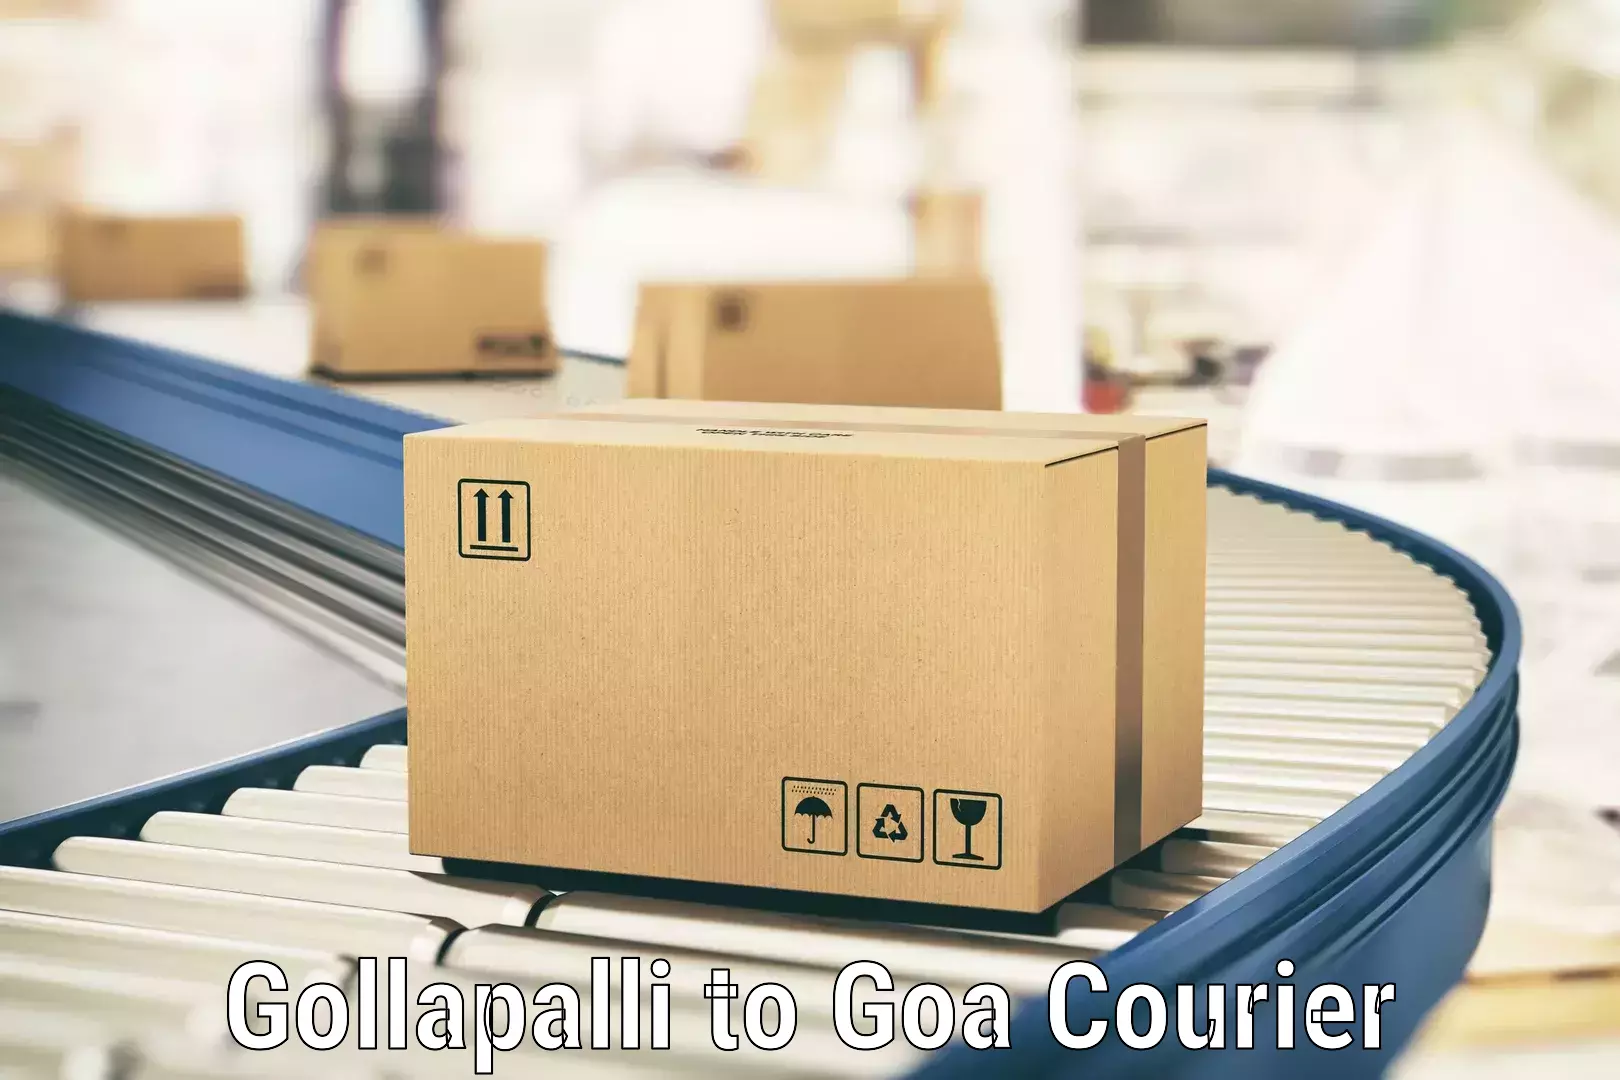 Express mail solutions Gollapalli to Panaji